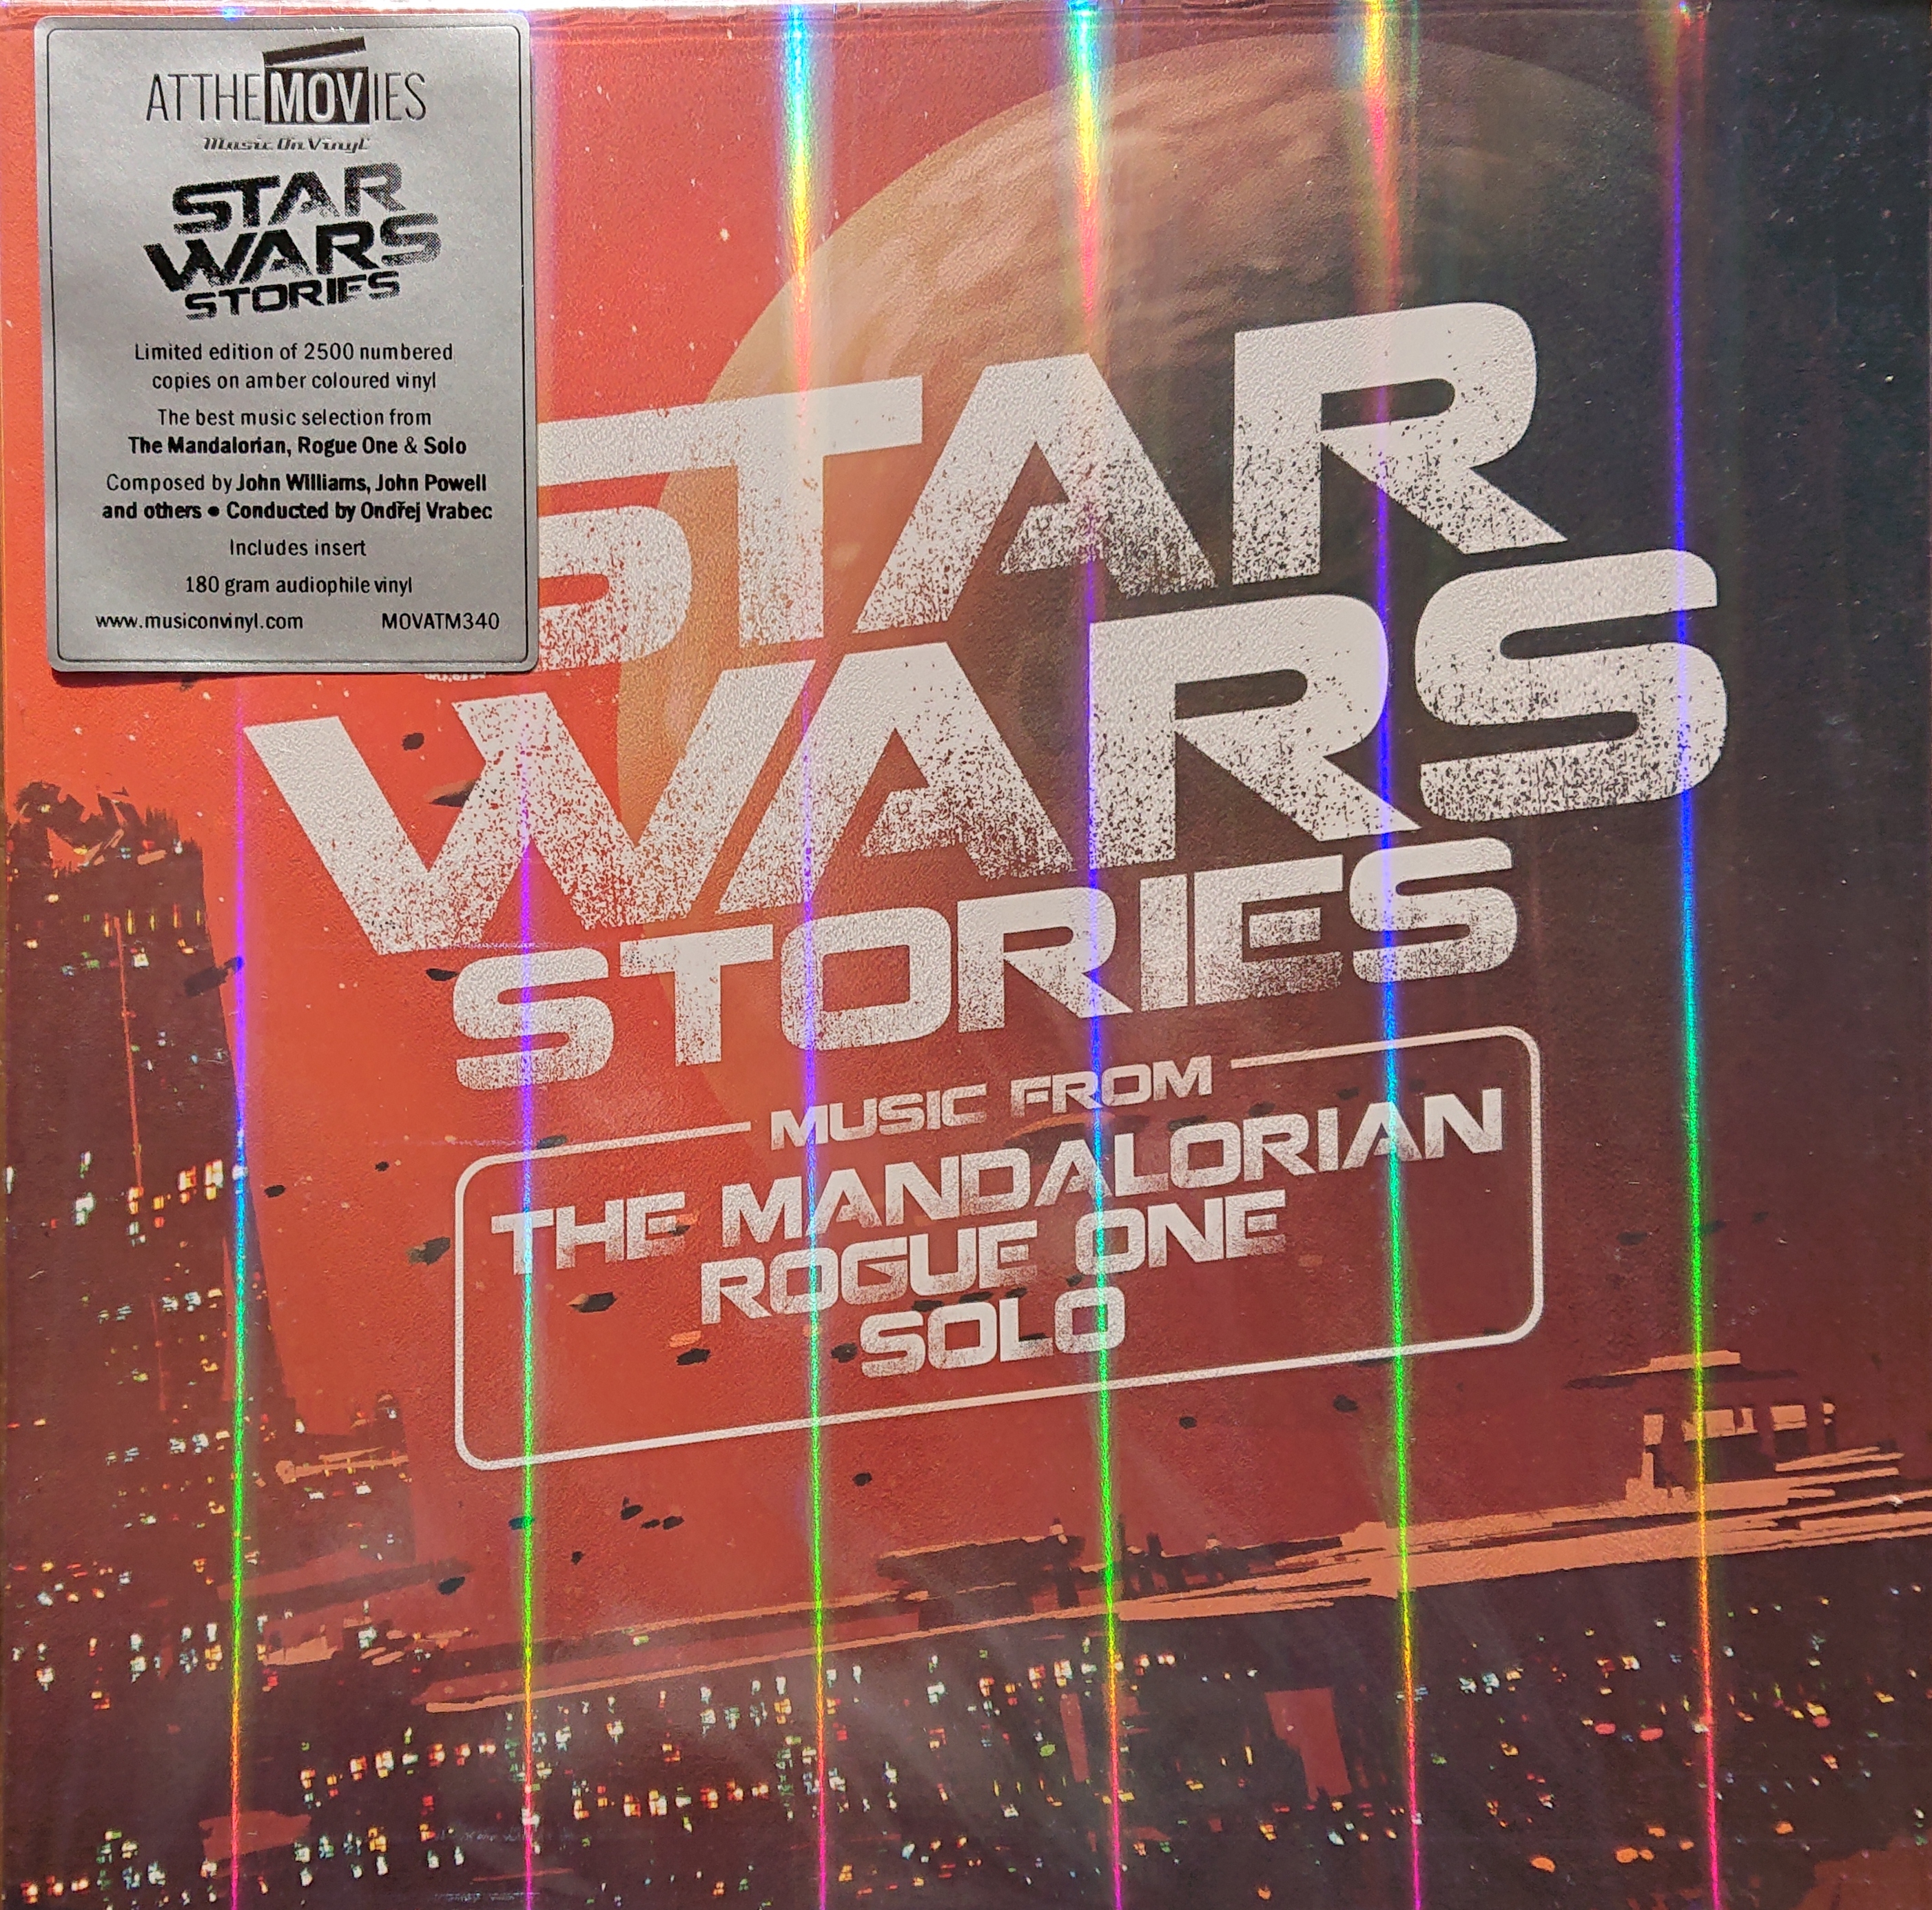 Picture of Star Wars stories by artist Ludwig Goransson / John Williams / John Powell / Anthony Williams / Michael Giacchino from ITV, Channel 4 and Channel 5 albums library